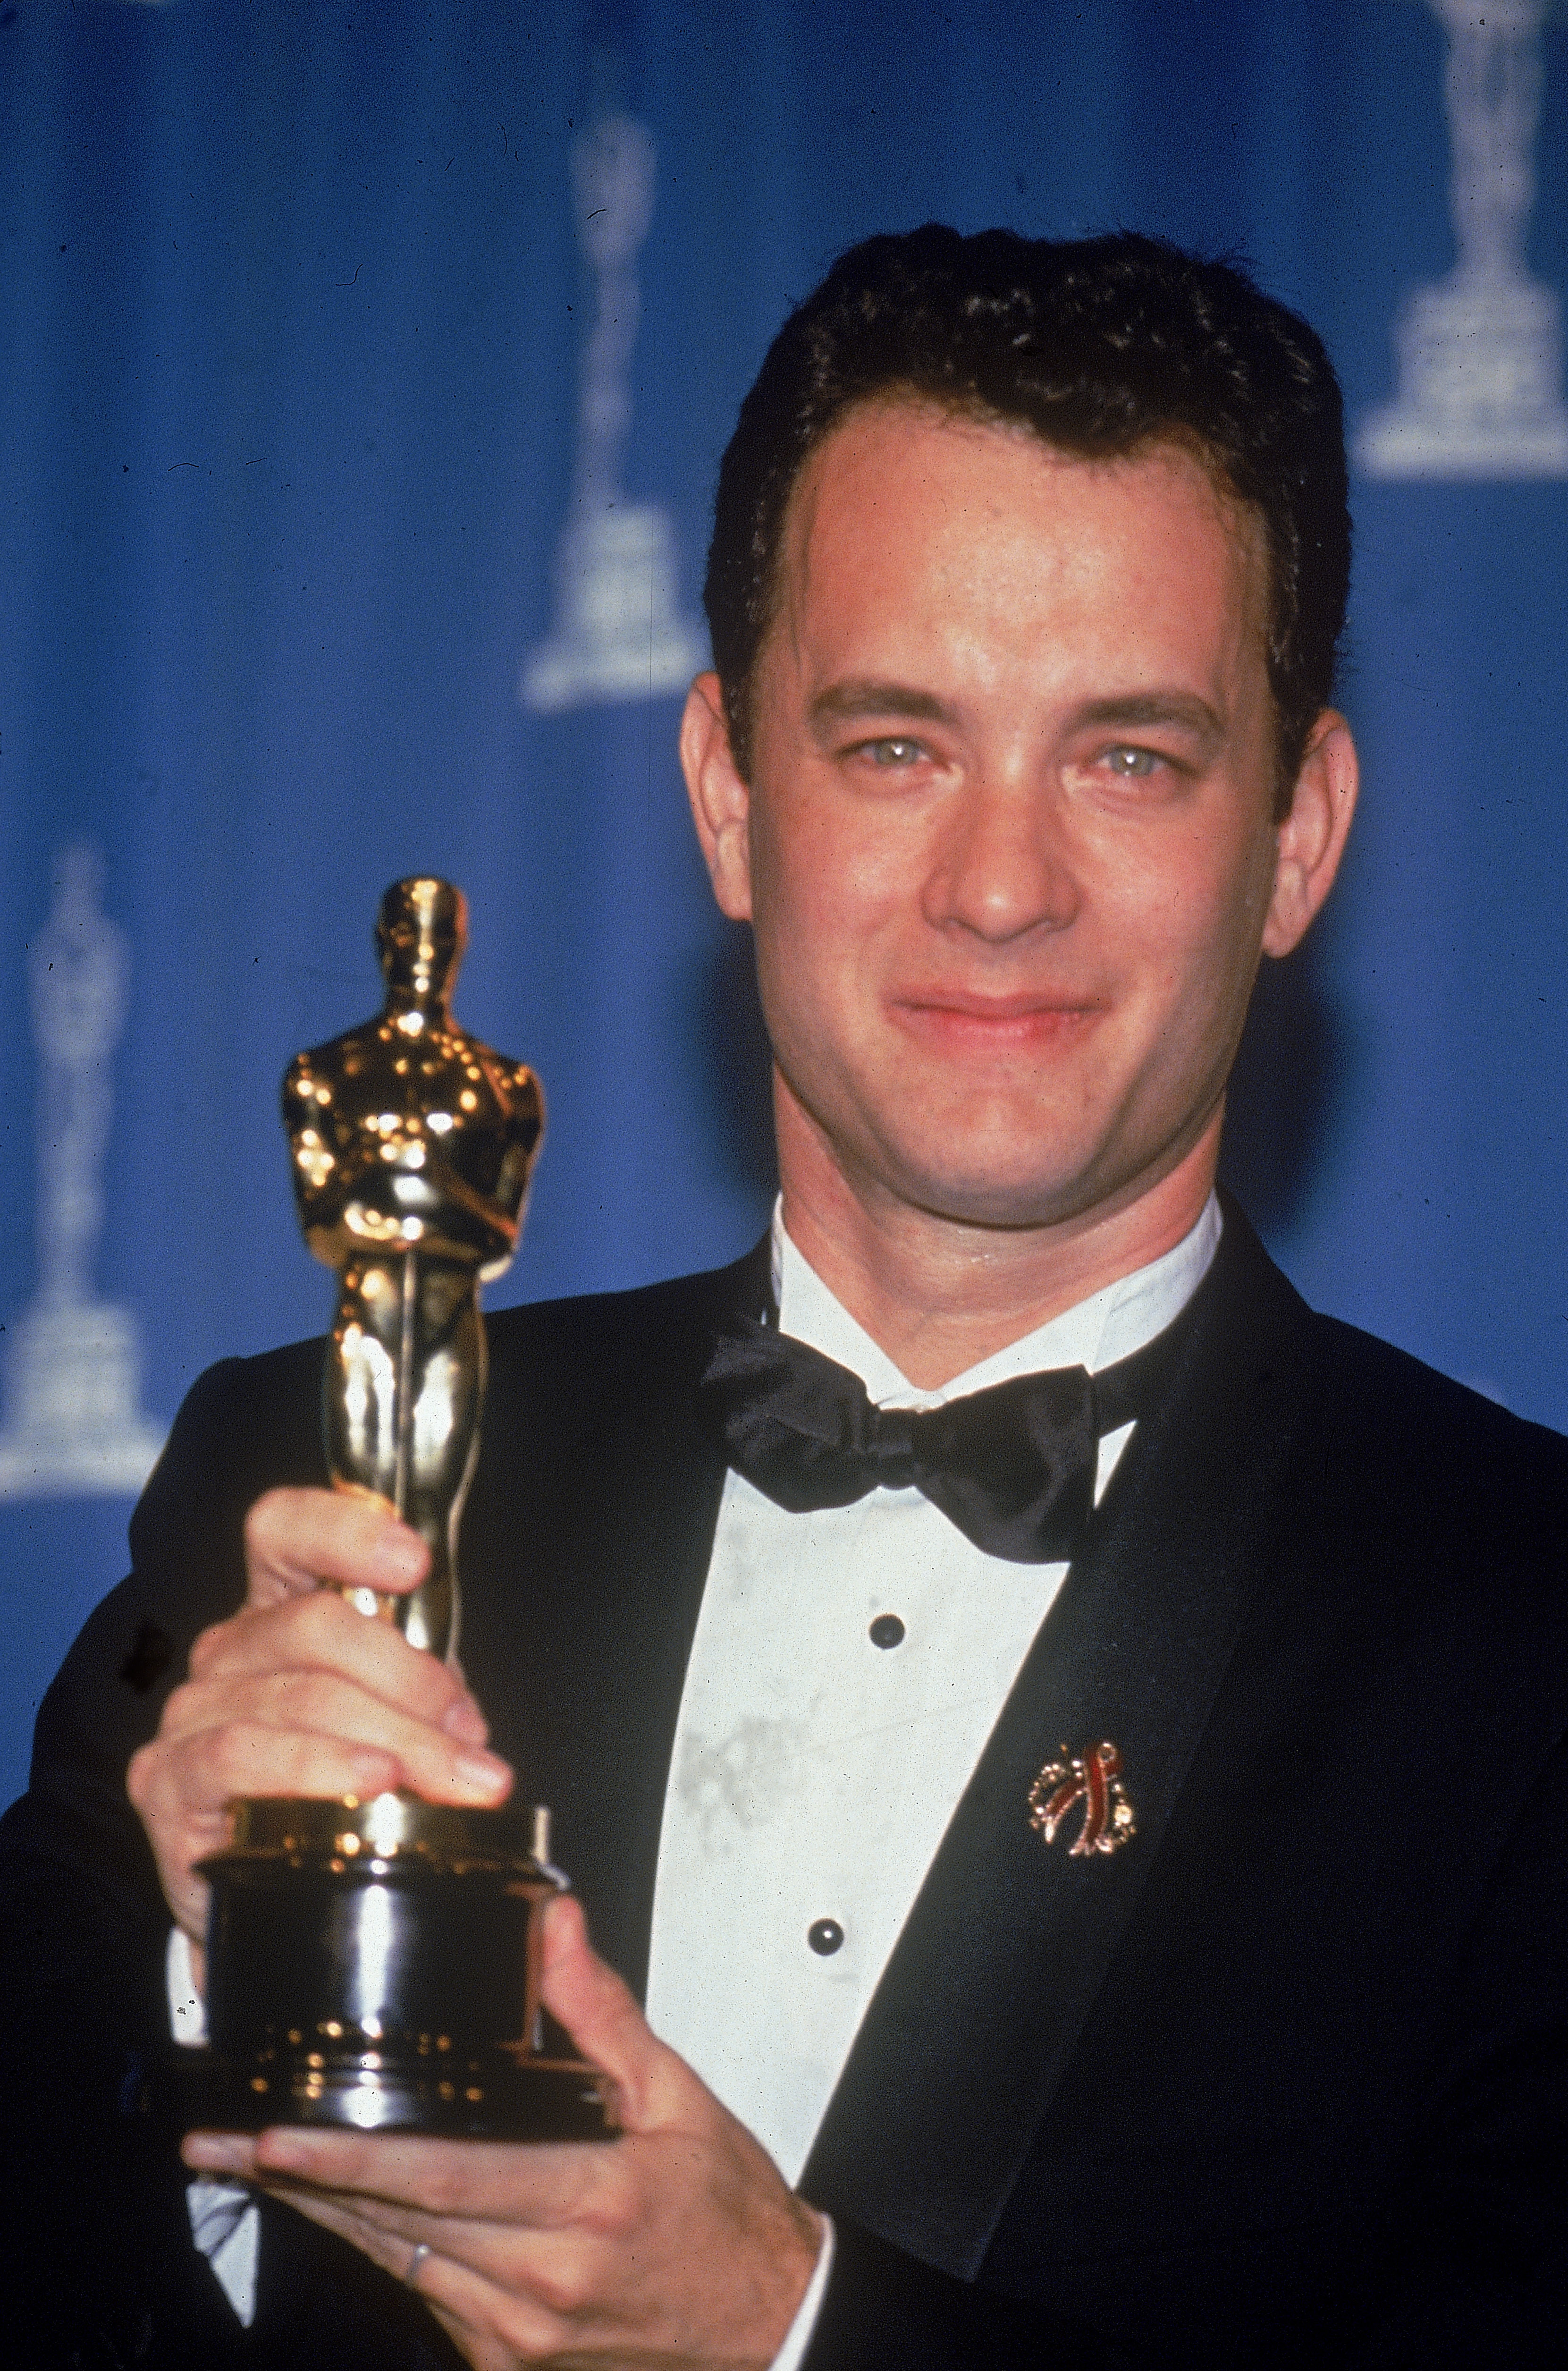 American actor Tom Hanks holds up the Oscar statuette he won for Best Actor for his role in the film 'Philadelphia' in Los Angeles, California, on March 21, 1994. (Fotos International—Getty Images)